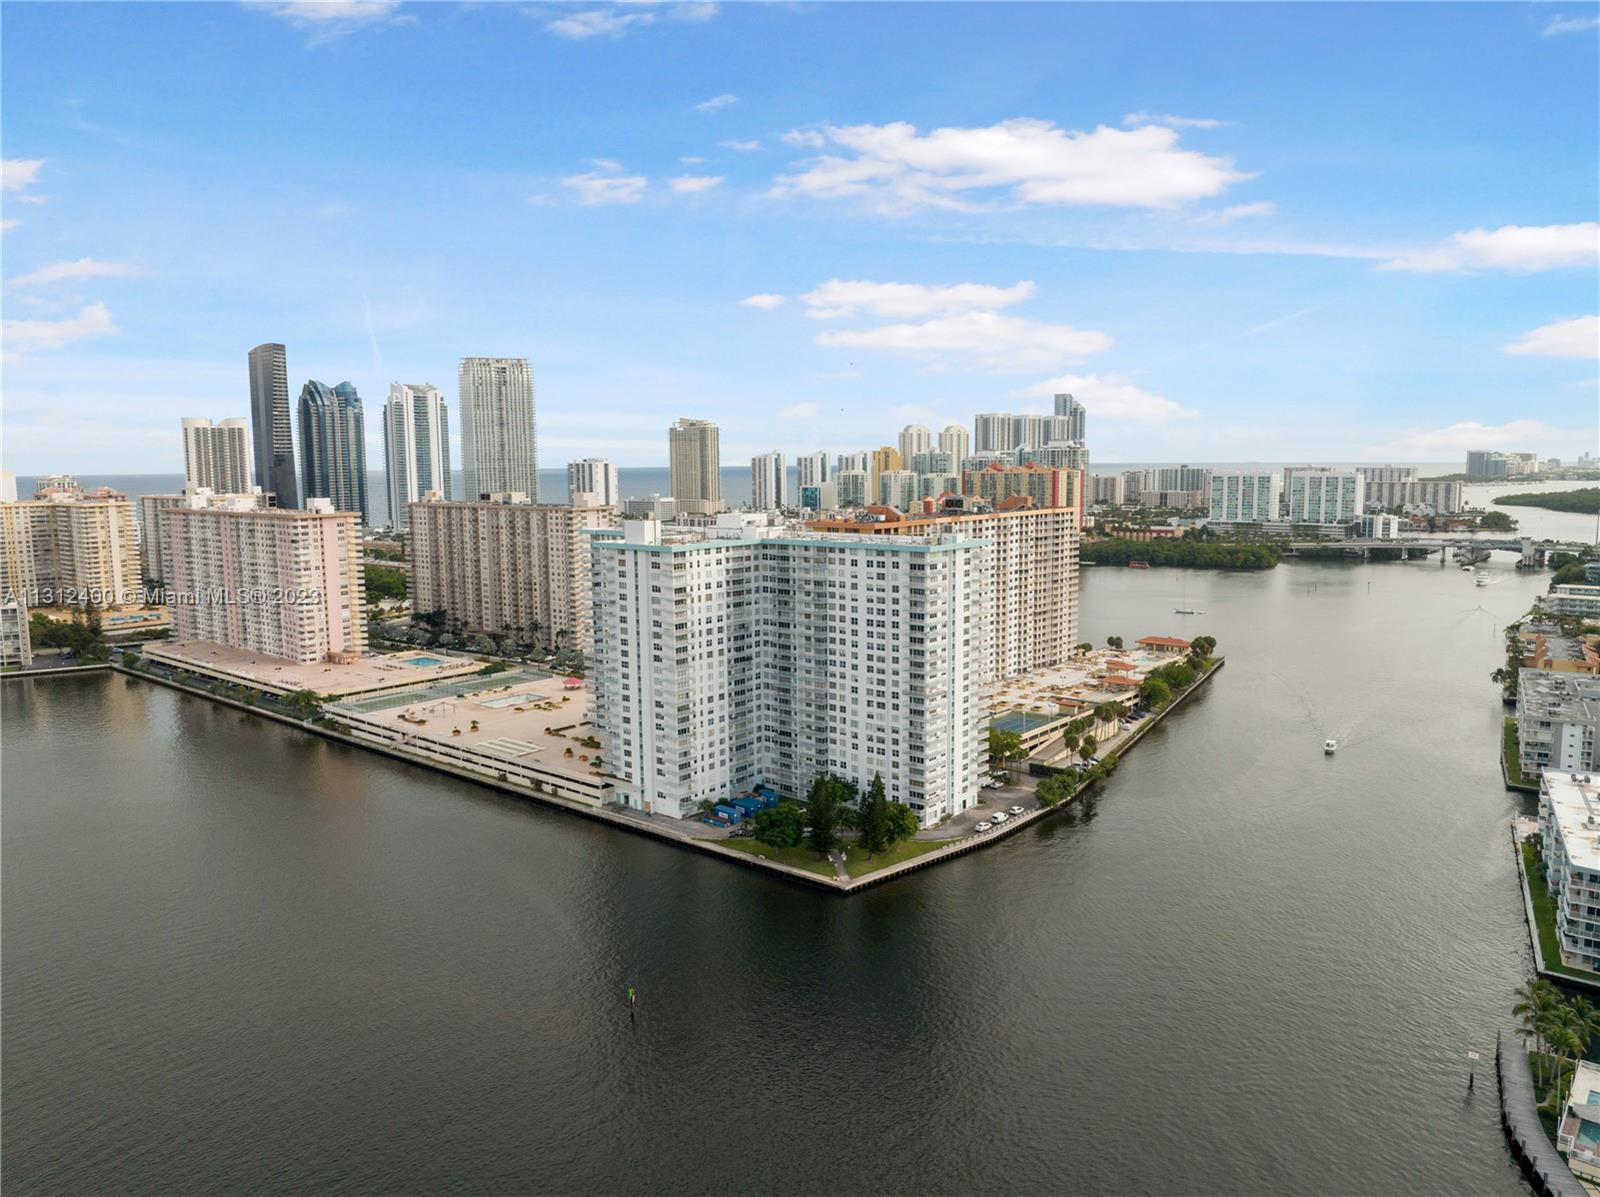 Breathtaking water views as you step inside this penthouse unit located on the 24th floor in the heart of Sunny Isles Beach. Enjoy stunning sunsets over the intercoastal from the spacious balcony. Large master suite with built in wardrobe and desk/vanity and walk-in closet. Bathrooms have been updated. Wood trimmed tray ceiling in kitchen. Refrigerator and dishwasher are new. Laundry facility located across from the unit. 40 yr re-certification is at the tail end of the project. Parking spaces available for lease for a small fee. Winston Towers Park is across the street. Walk to some of the most beautiful beaches in all of Florida. Walk to shops, restaurants, banks and more.